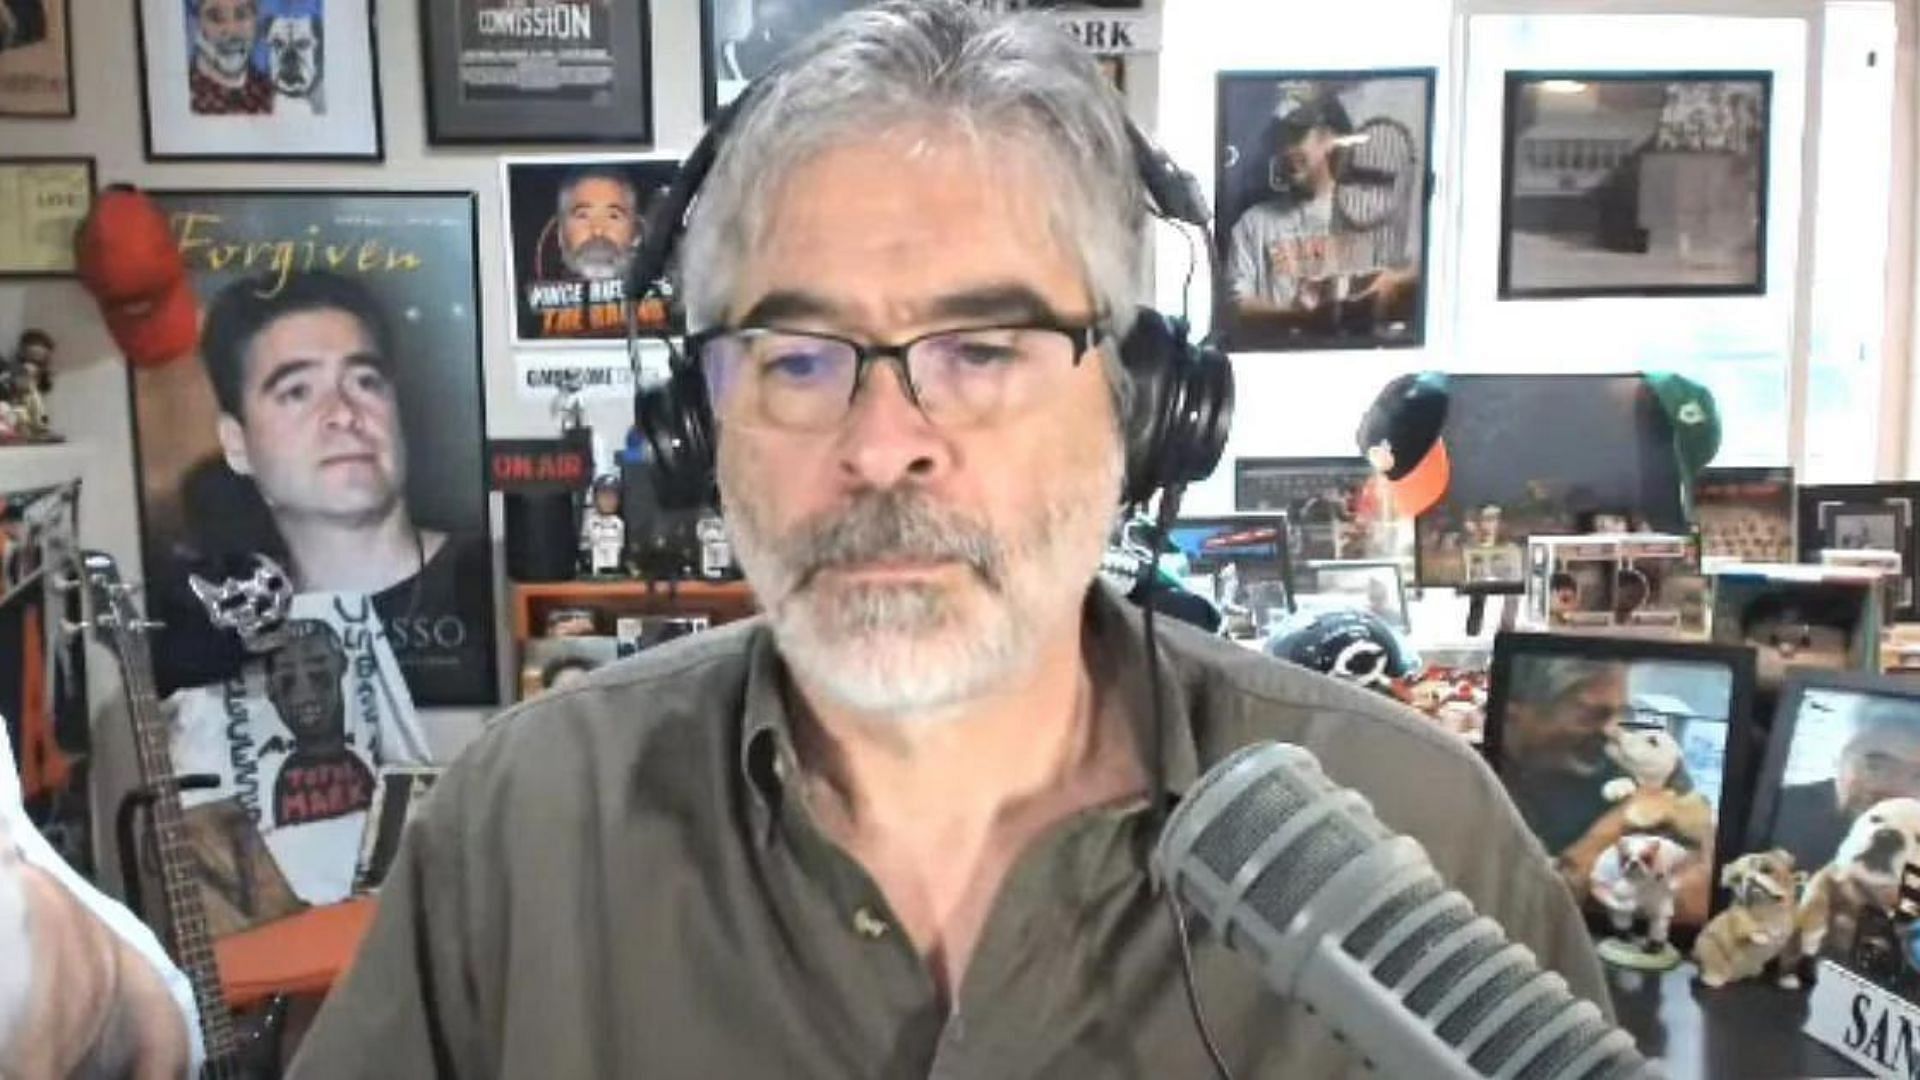 Former WWE personality Vince Russo